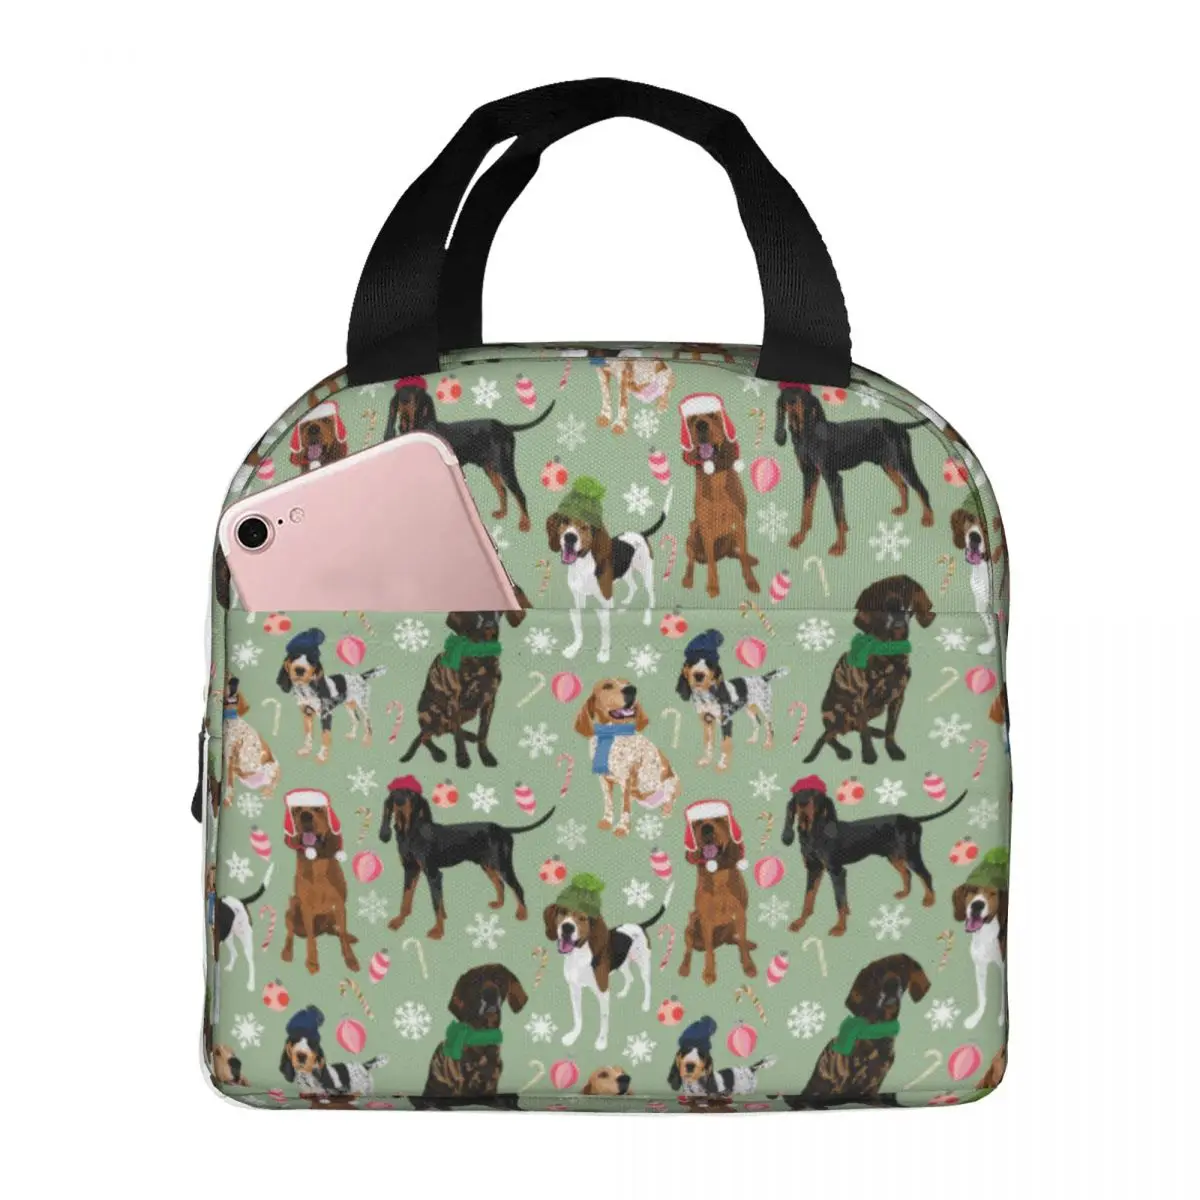 Coonhounds Green Dog Lunch Bag Portable Insulated Oxford Cooler Animal Thermal Cold Food Picnic Lunch Box for Women Girl